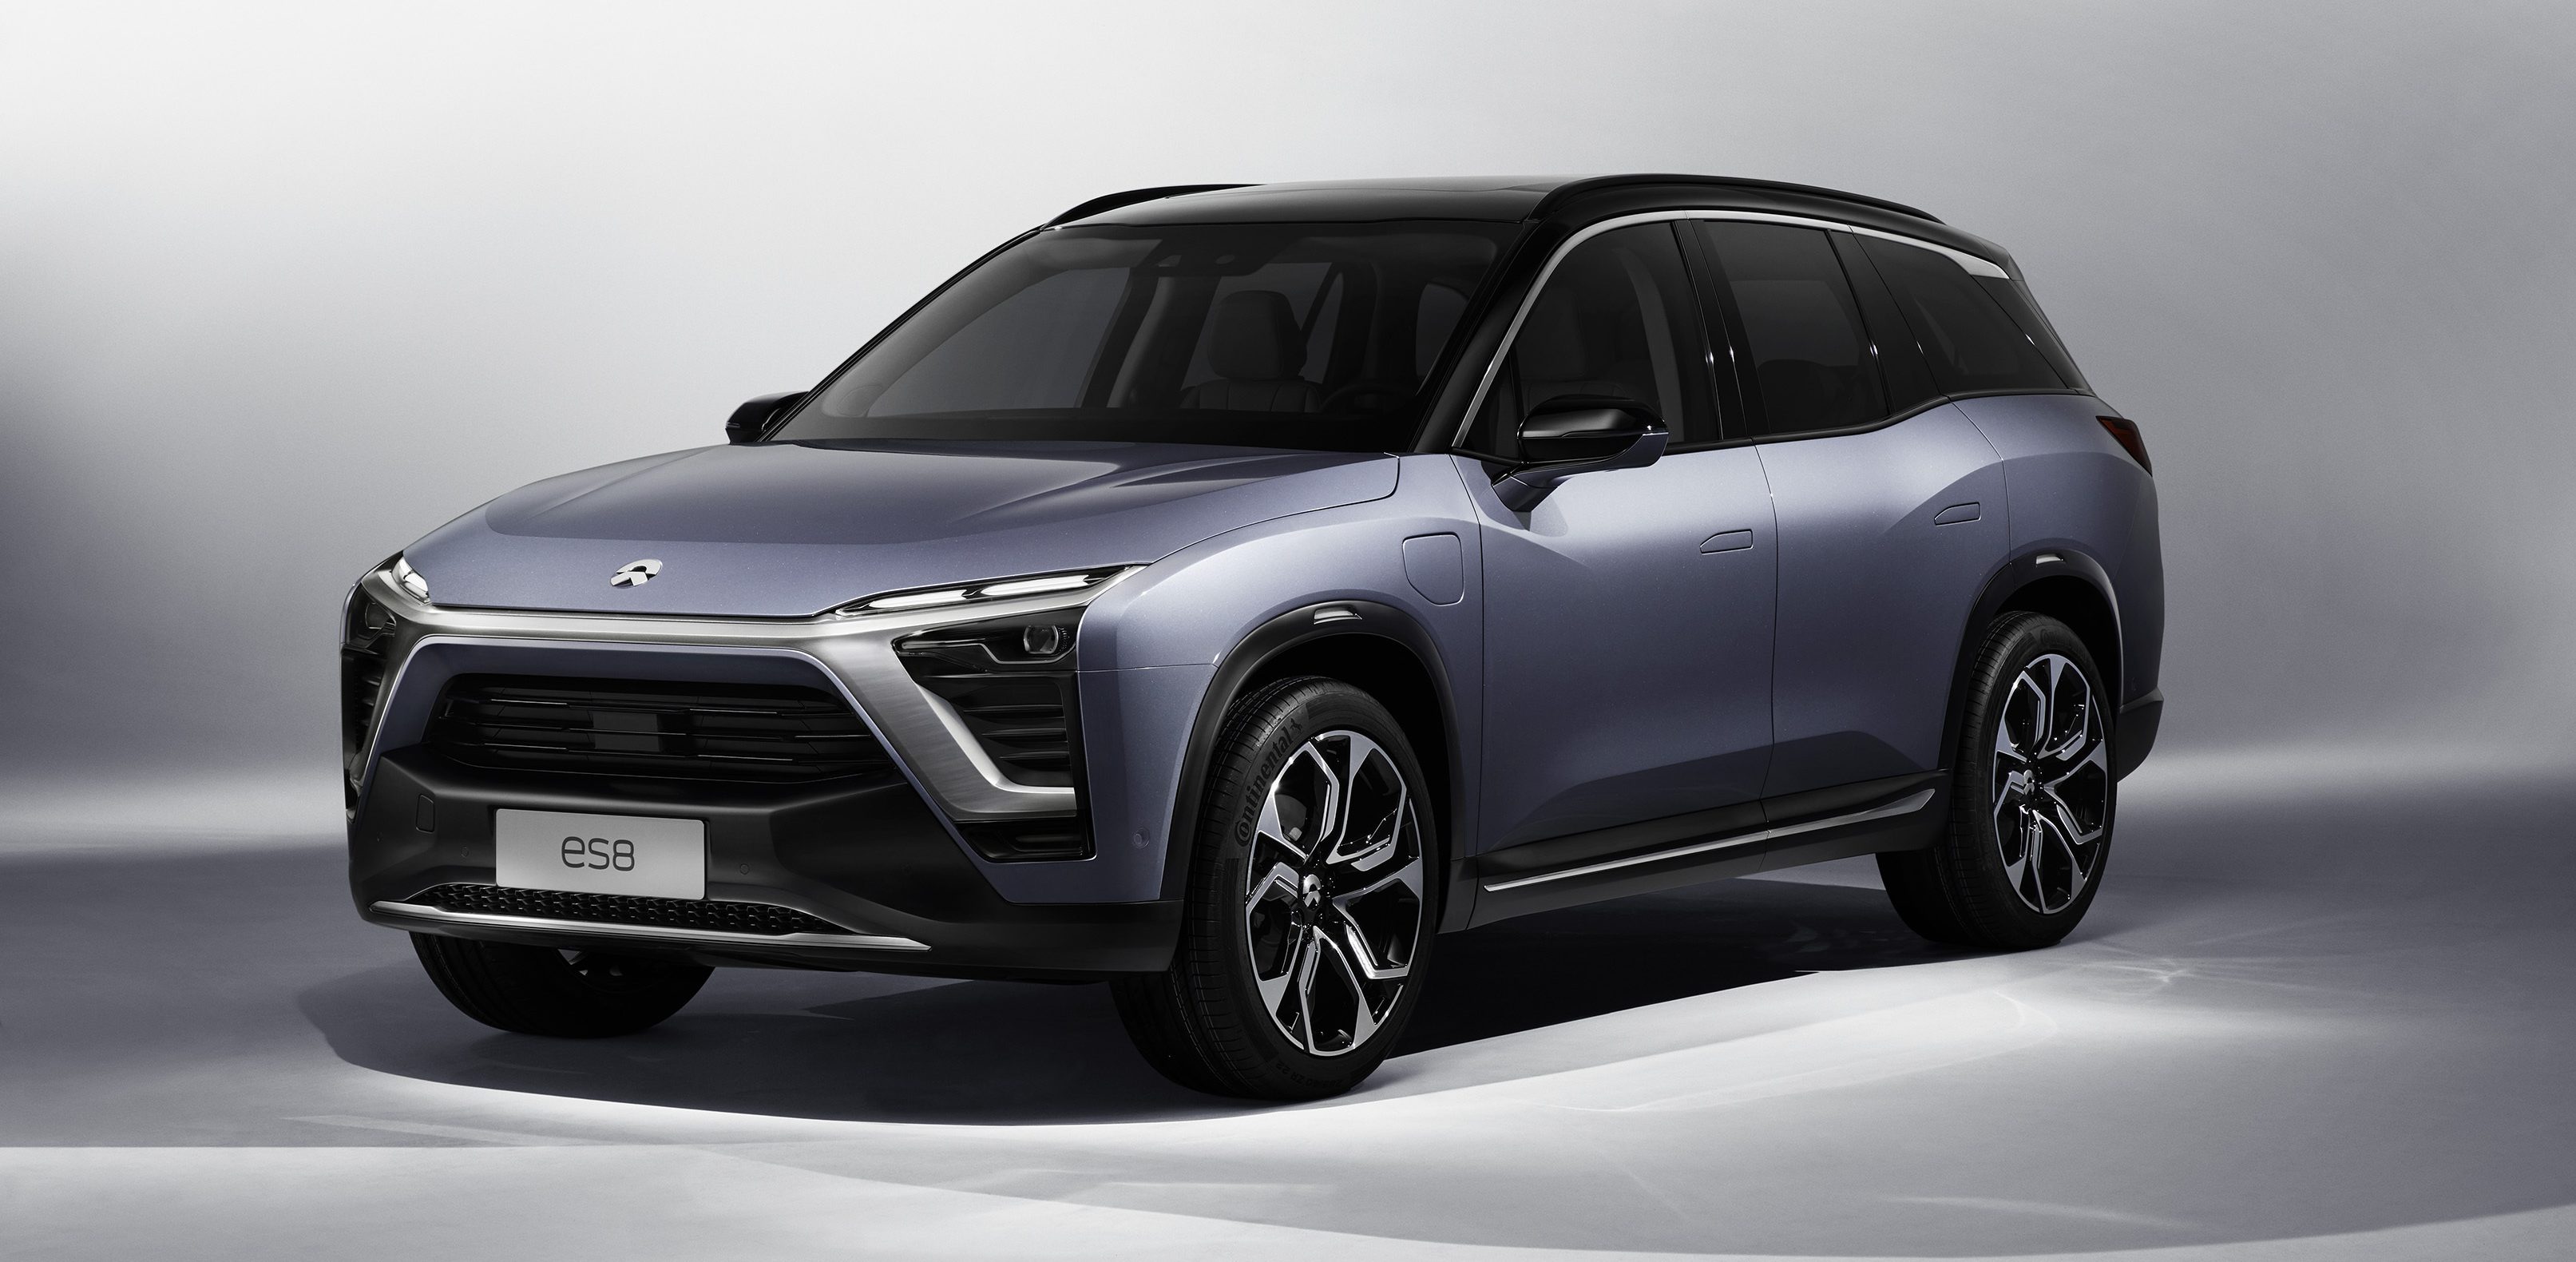 NIO unveils its first production electric vehicle 7seater SUV with battery swap Electrek